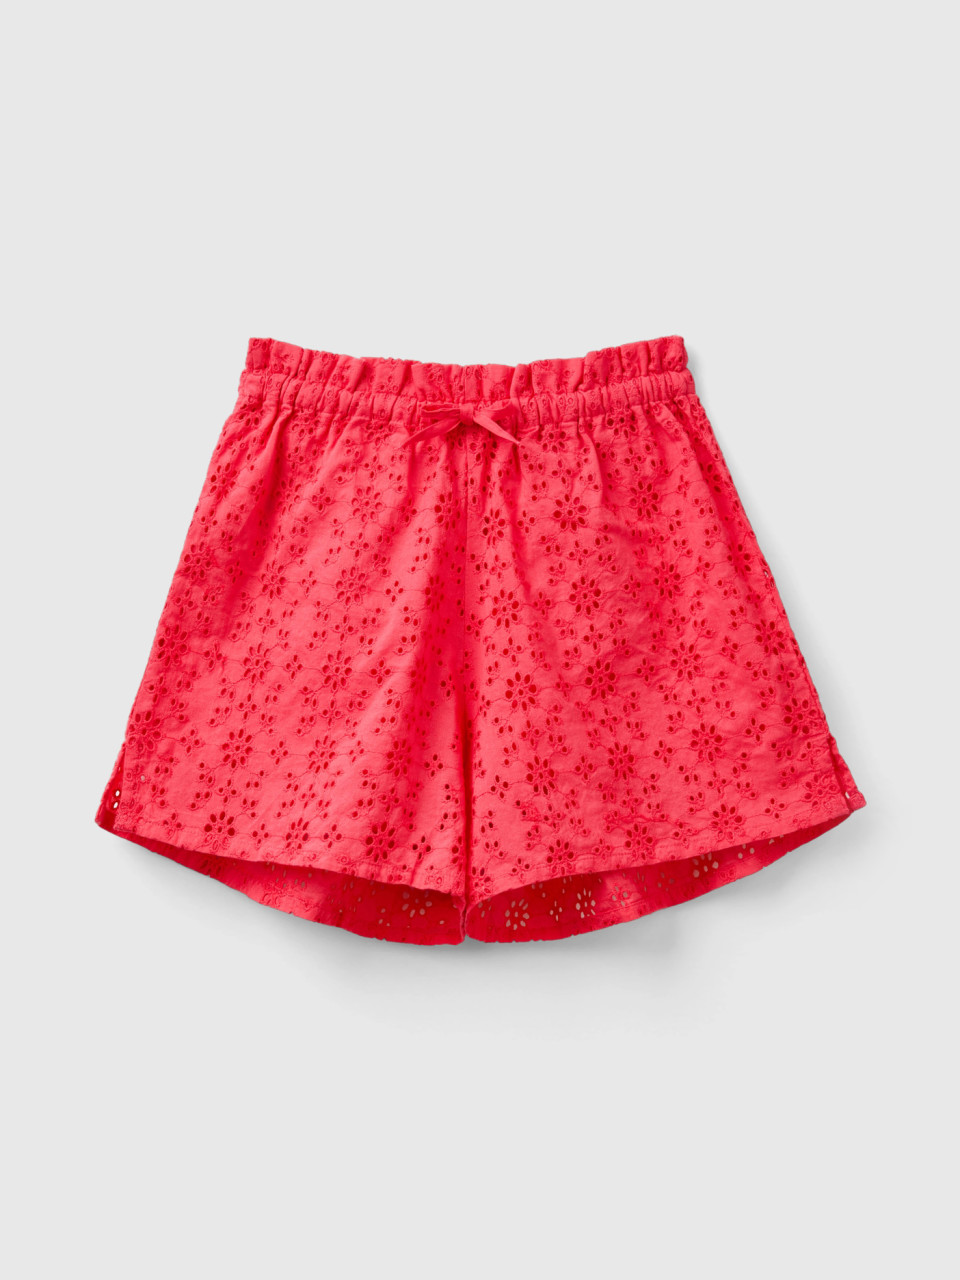 Benetton, Shorts With Broderie Anglaise Embroidery, Fuchsia, Kids